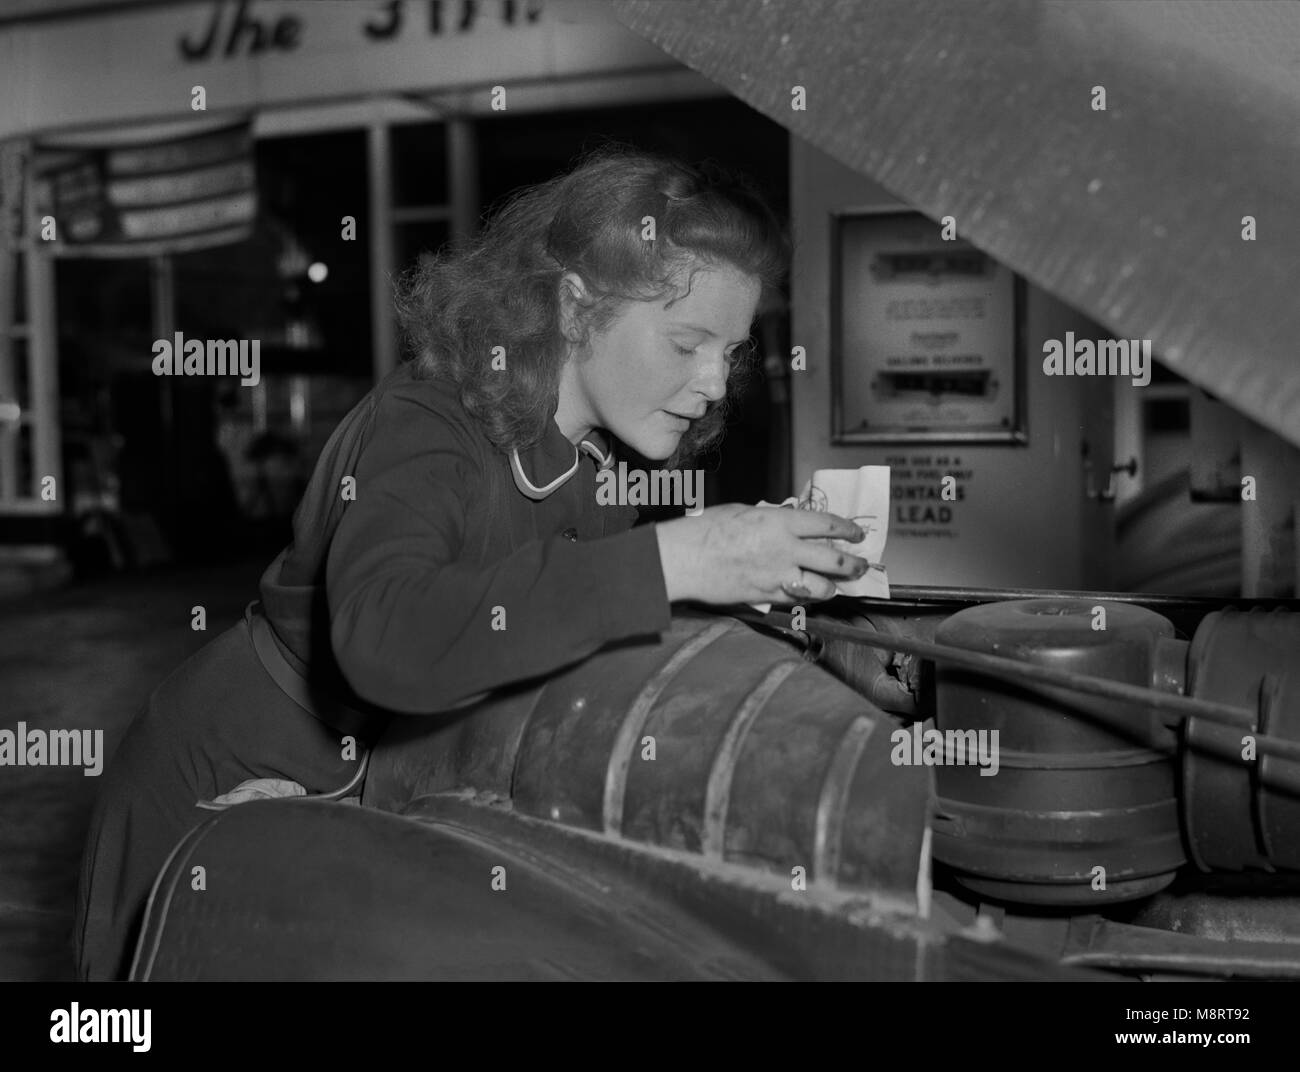 Virginia Excell, formerly a Butcher, now a Service Station Attendant as new Jobs have opened up for Women during WWII, Checking Car Engine, East Liverpool, Ohio, USA, Ann Rosener, Office of War Information, September 1942 Stock Photo